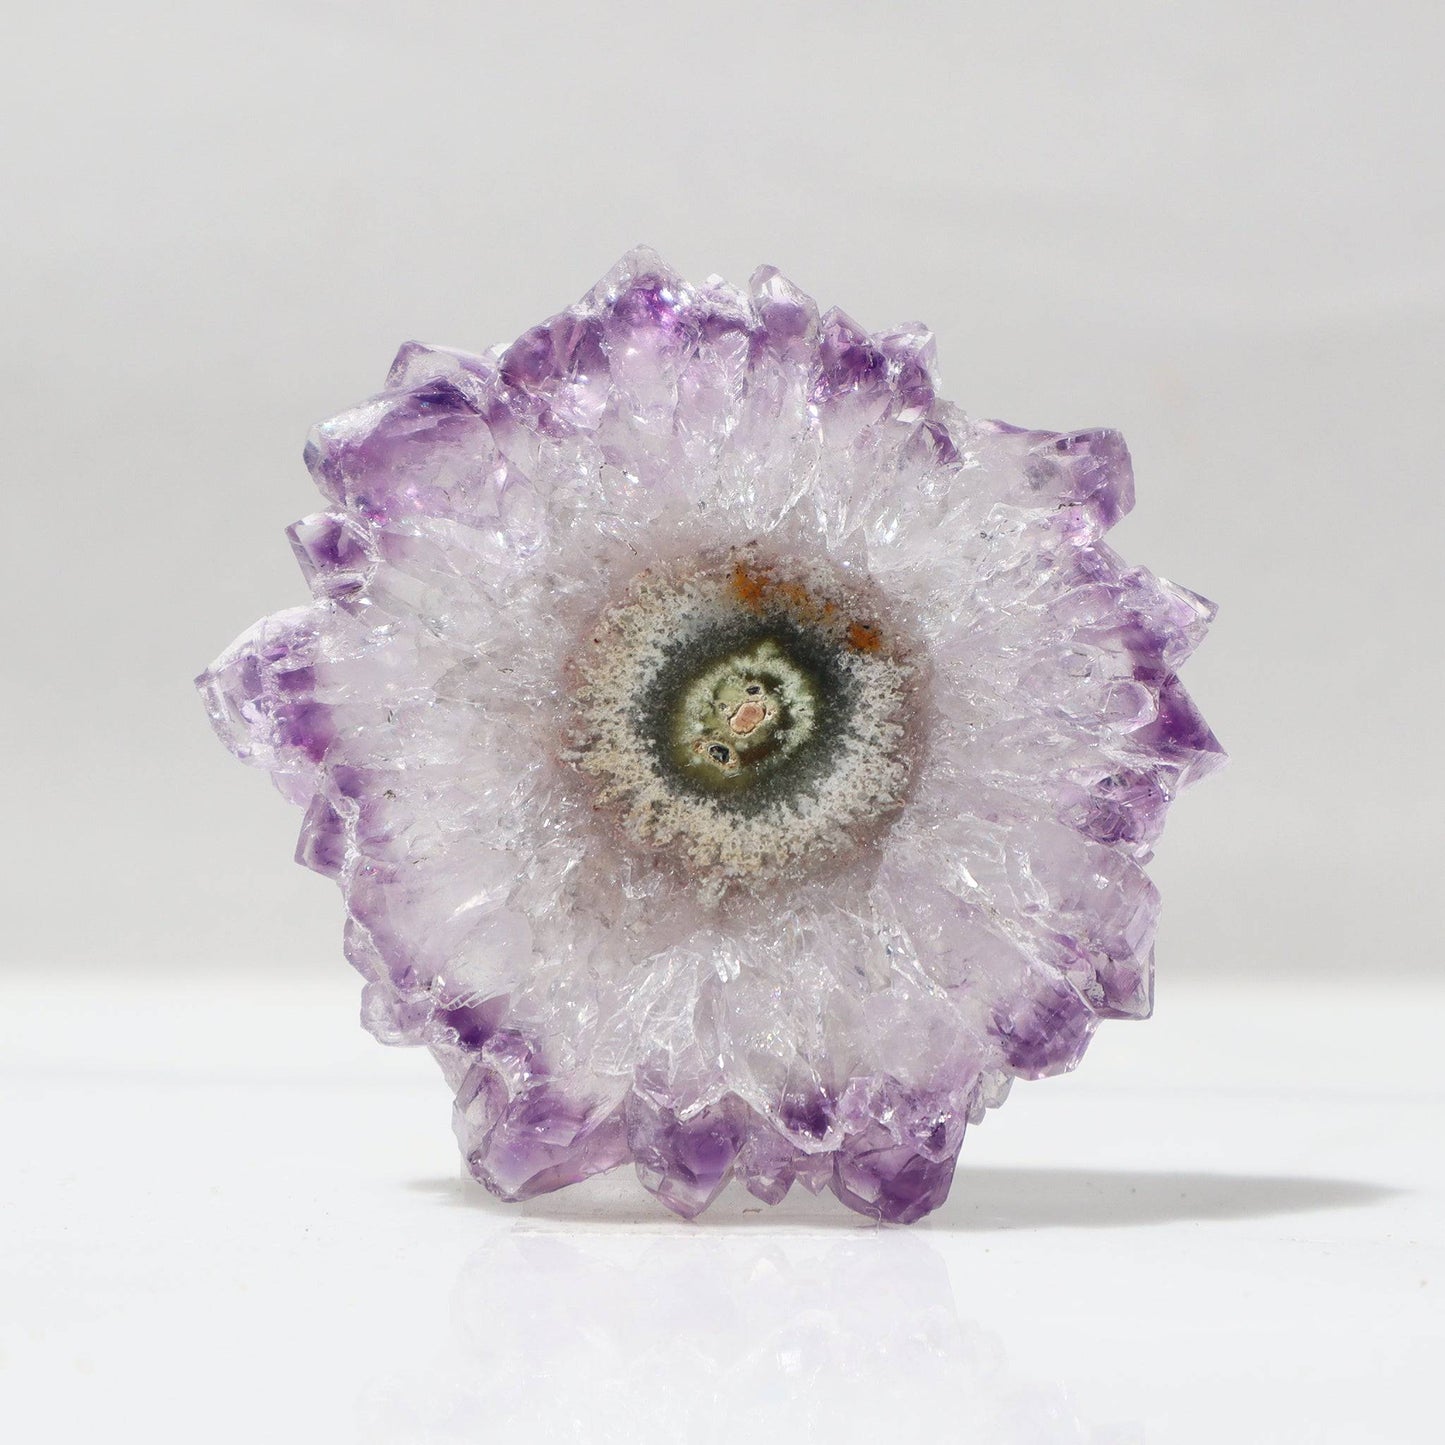 This classy Uruguayan amethyst stalactite slice offers us a perfect flower of quartz crystals outlined in delicate purple with a center of green jasper and a detail of red hematite.   